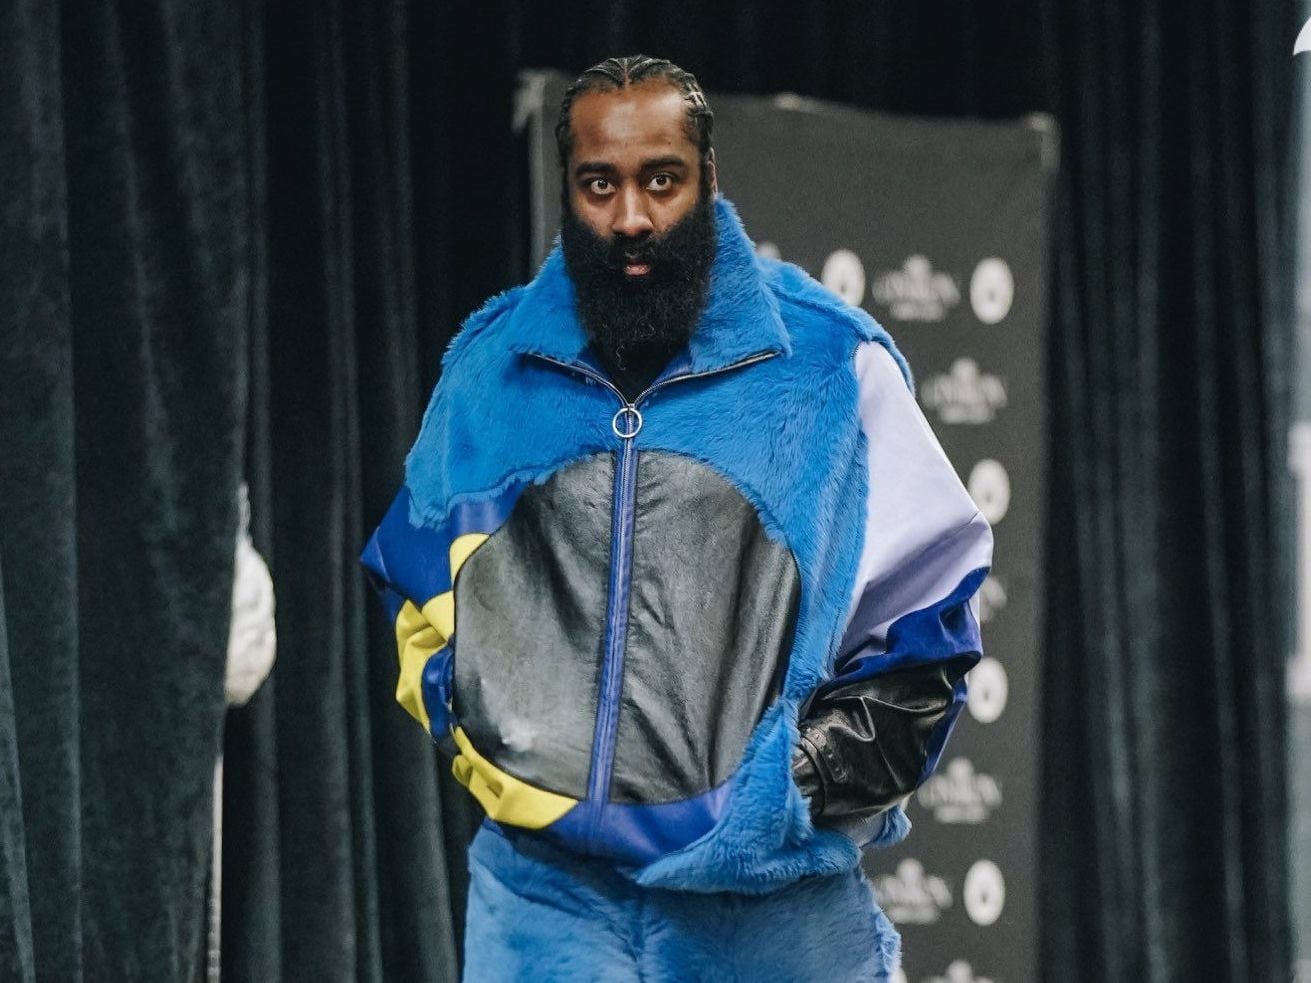 James Harden's blue furry get-up was designed in Milan, not on